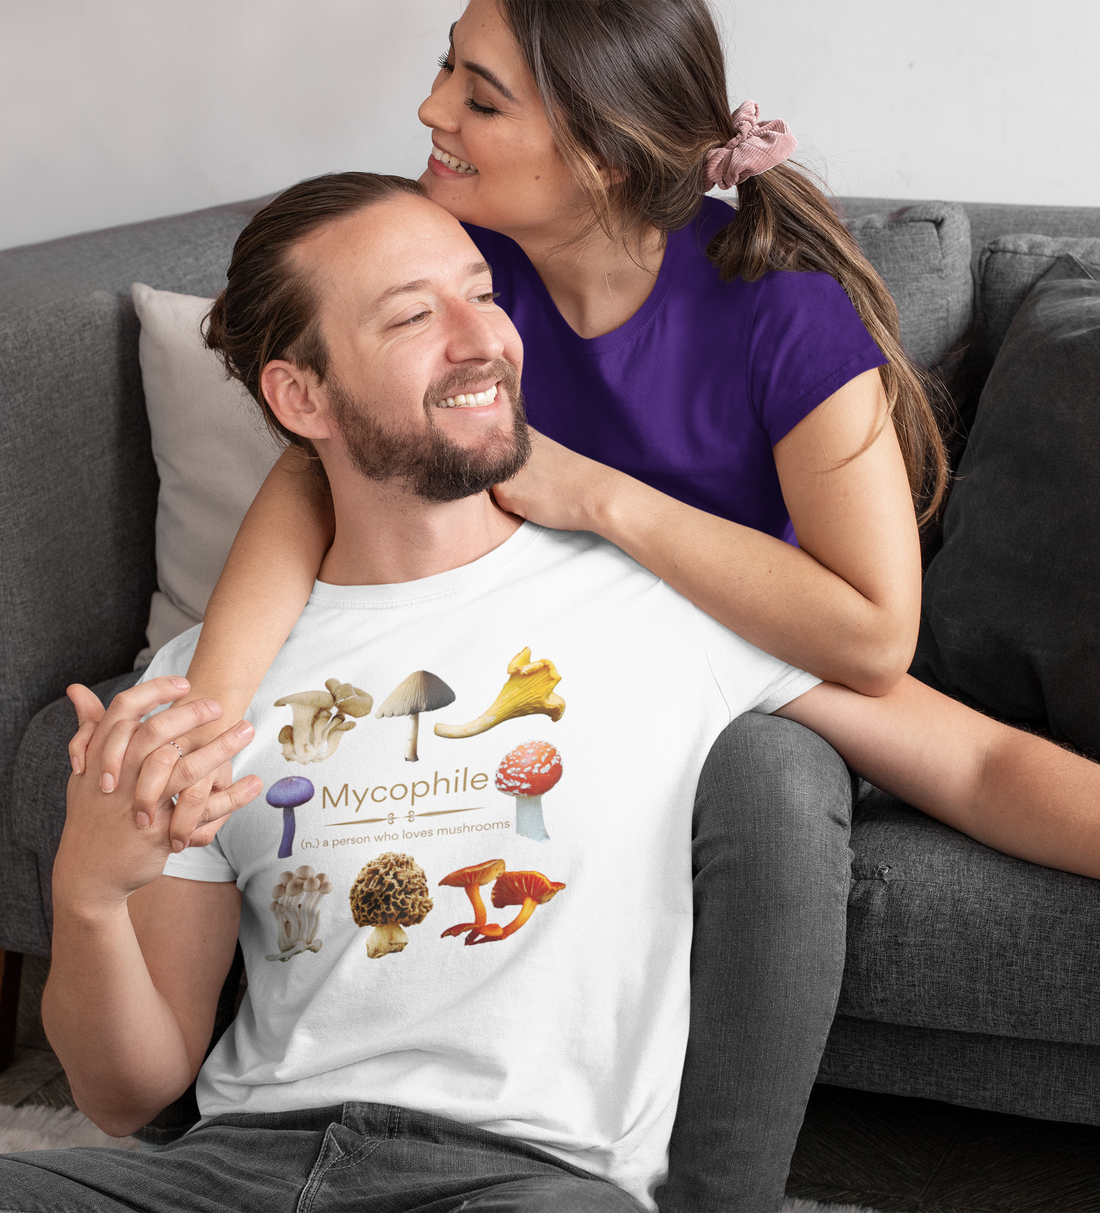 A man with a t-shirt saying 'mycophile - a person who loves mushrooms' with several real photos of mushrooms such as morel, chanterelle, etc. He is leaning against a woman in a t-shirt on a couch, both relaxed and smiling